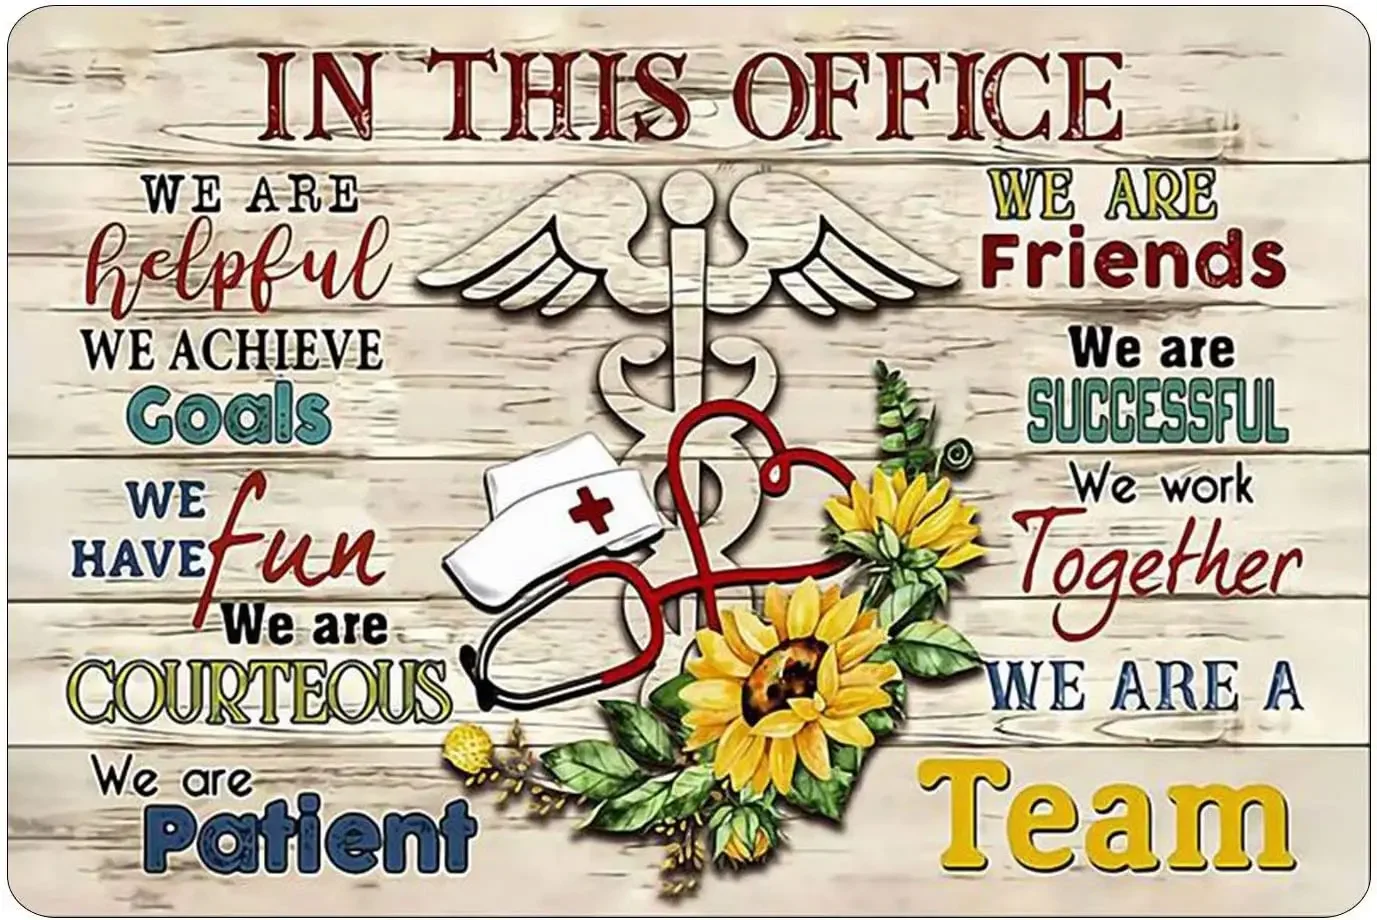 

Retro Tin Sign, In This Office We Are Helpful Nurse We Are Team -Medical Slogan Vintage Metal Poster Wall Art, House